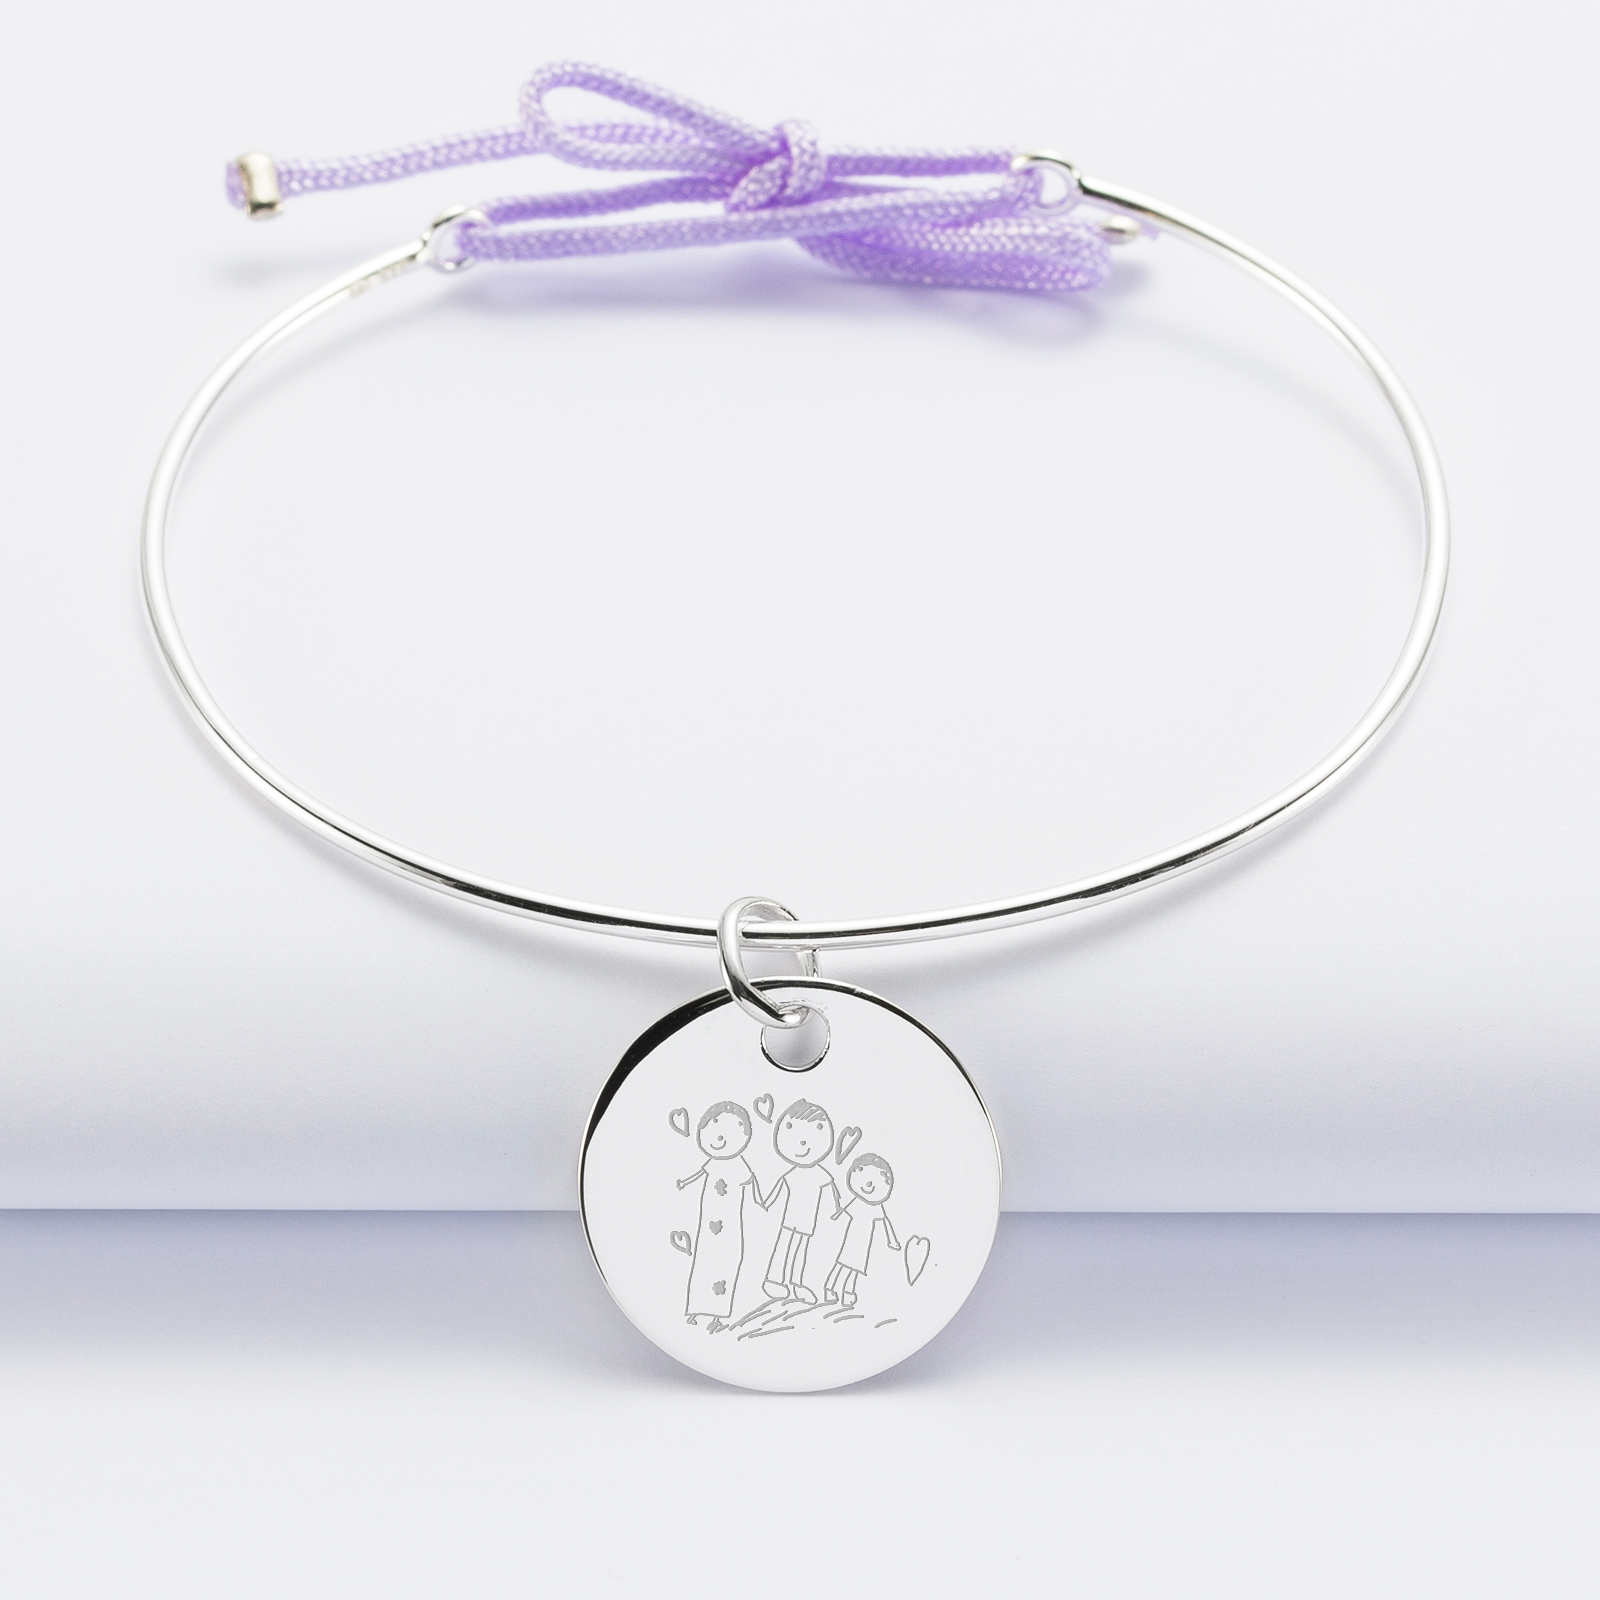 Personalised silver and cord bangle bracelet and 19 mm engraved medallion - sketch